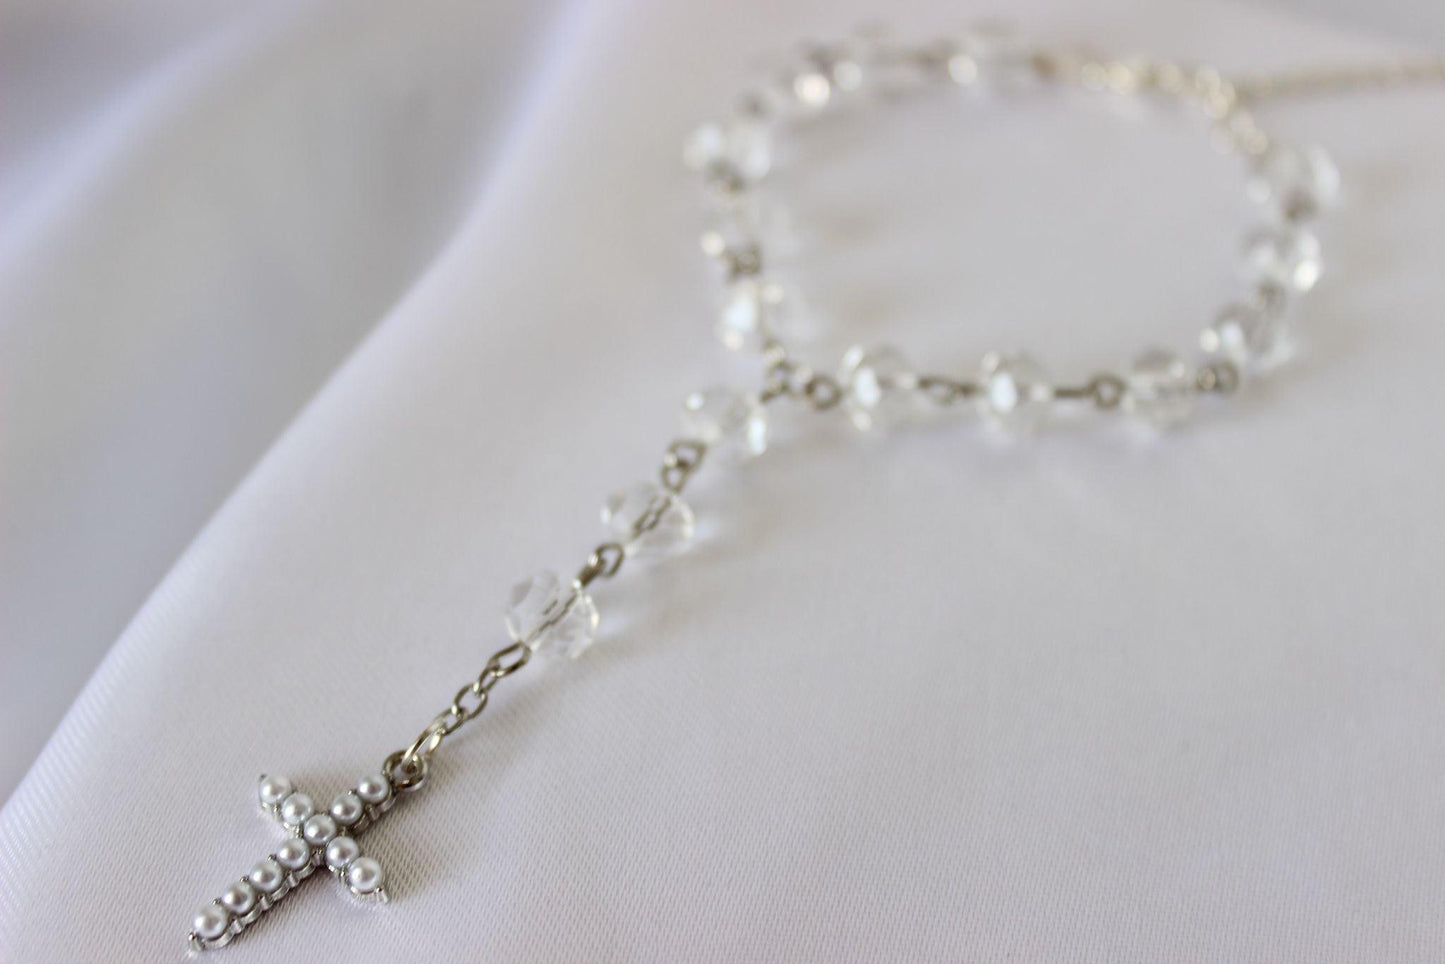 Amore Collective bridal wedding accessories bracelets rosary